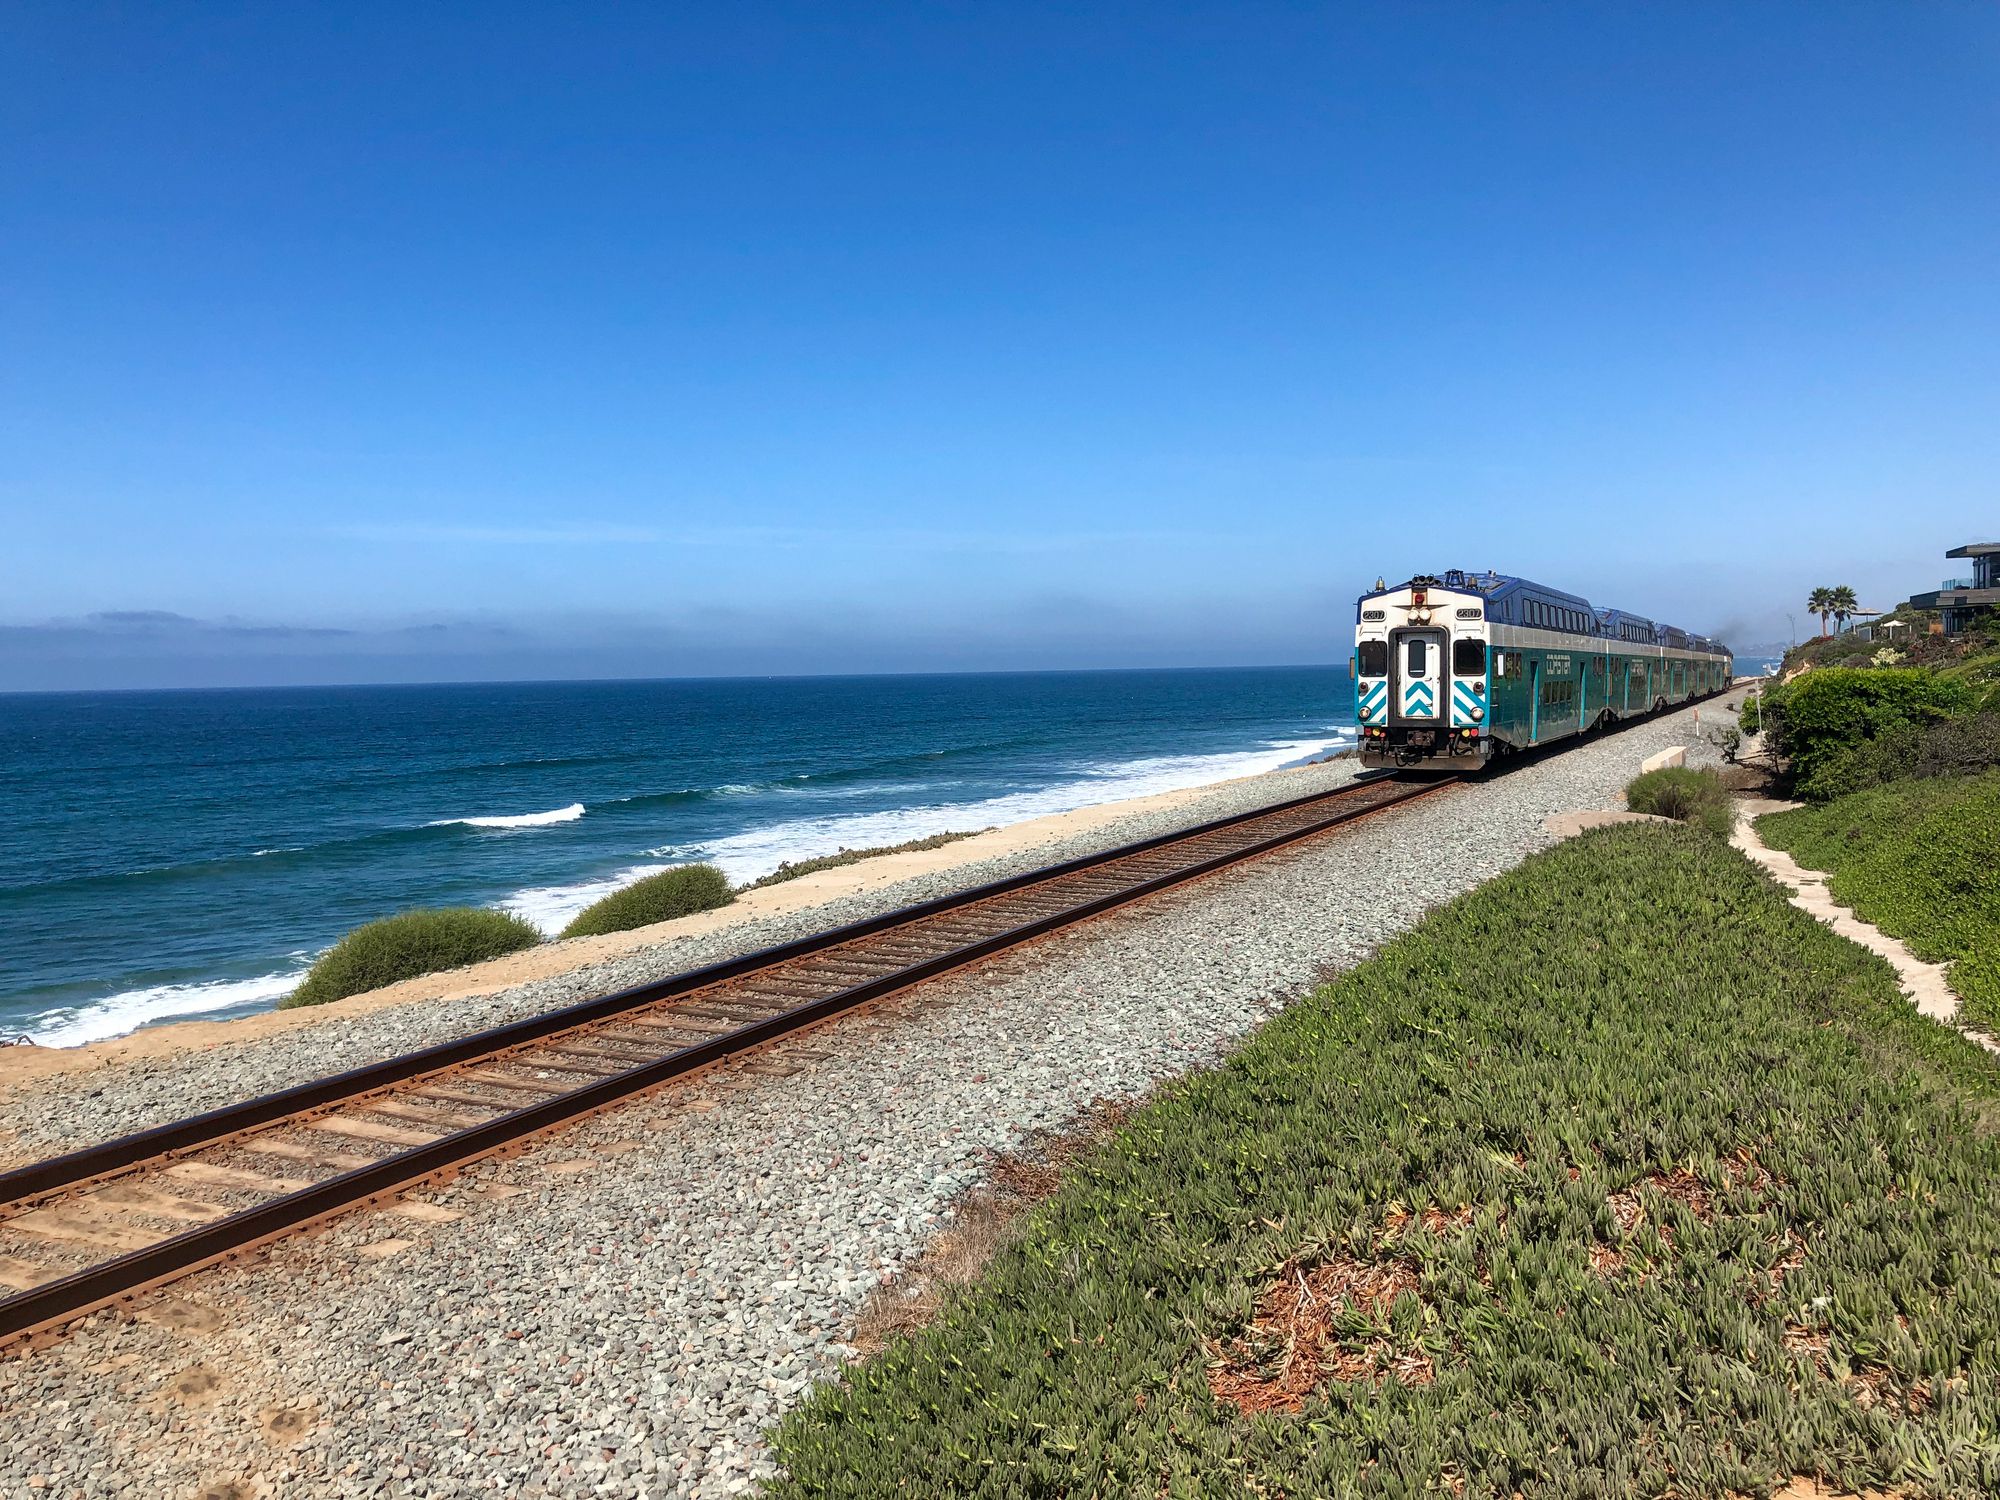 <p>The Pacific Surfliner, also operated by Amtrak, offers a stunning train journey along 351 miles of California’s Pacific coastline from San Luis Obispo to San Diego. Take your time to enjoy views of pristine beaches and rolling green hills from the comfort of your reclining seat.</p><p>Potential stops to visit along the way include Grover Beach, Santa Barbara, Oxnard, Los Angeles and Anaheim. Each destination has its own range of activities and highlights. The beach is located just two blocks from the Santa Barbara rail station or you could head to the Channel Islands National Park from Oxnard.</p>